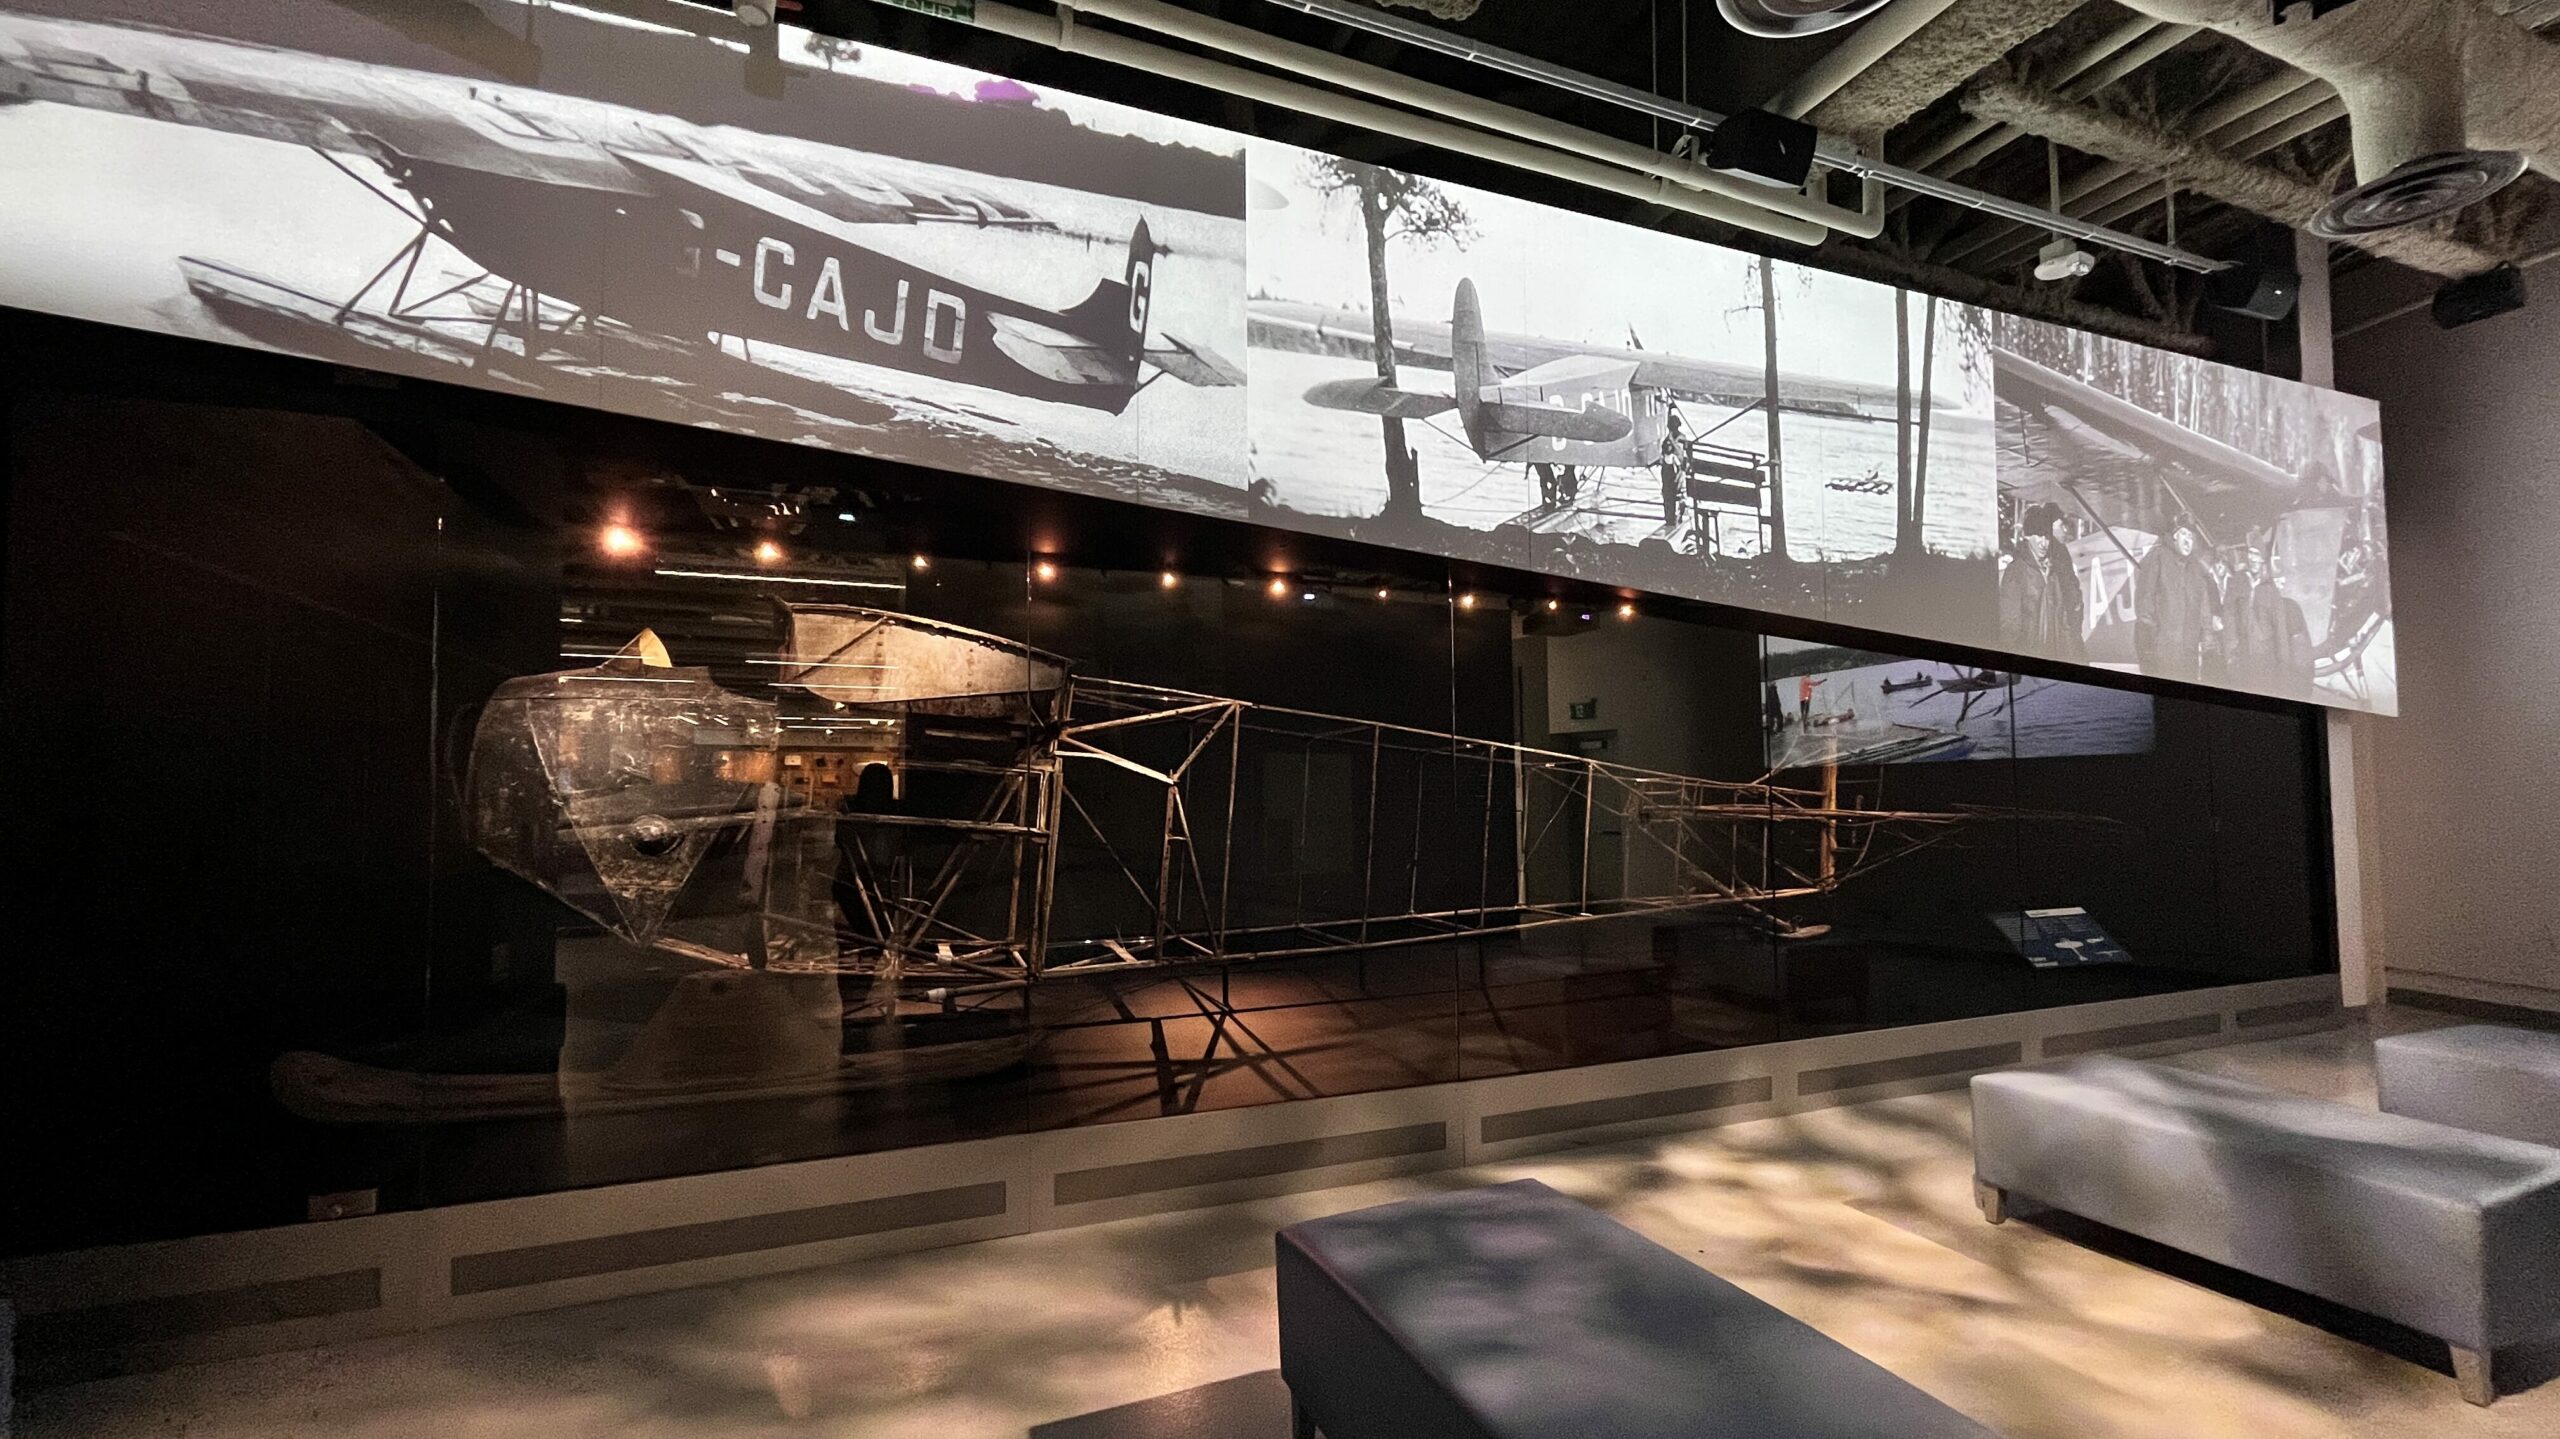 The Fokker Universal, G-CAJD, aka The Ghost of Charron Lake, sits behind glass at the Royal Aviation Museum of Western Canada